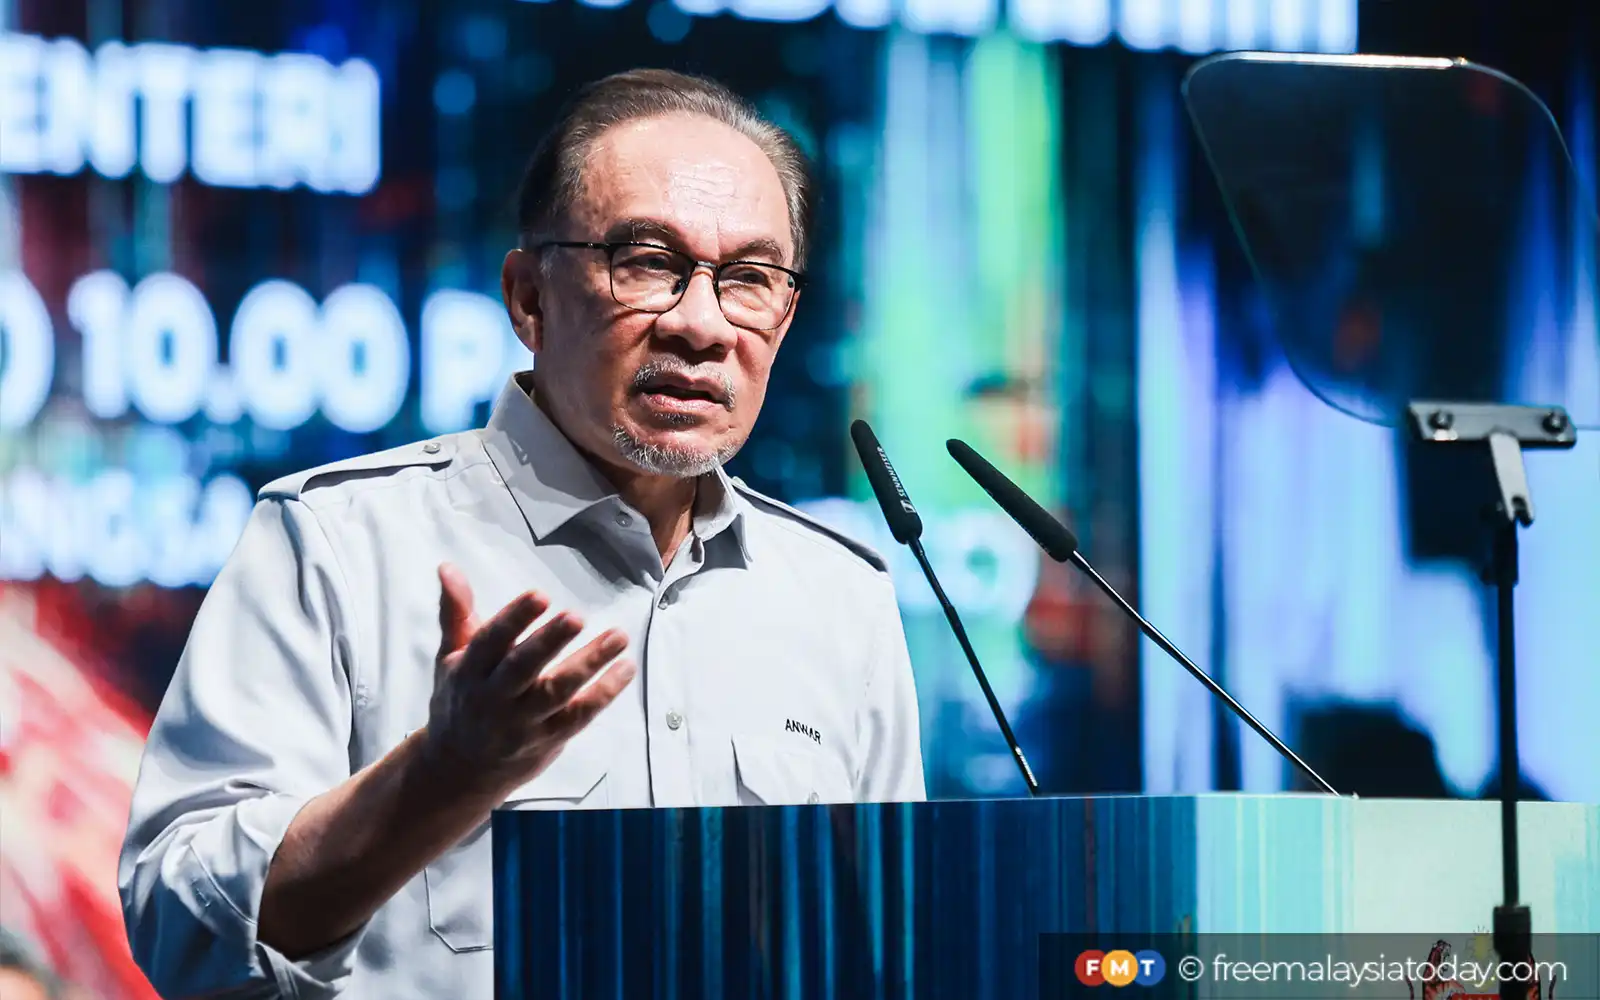 false claims on casino will land you in jail, says anwar